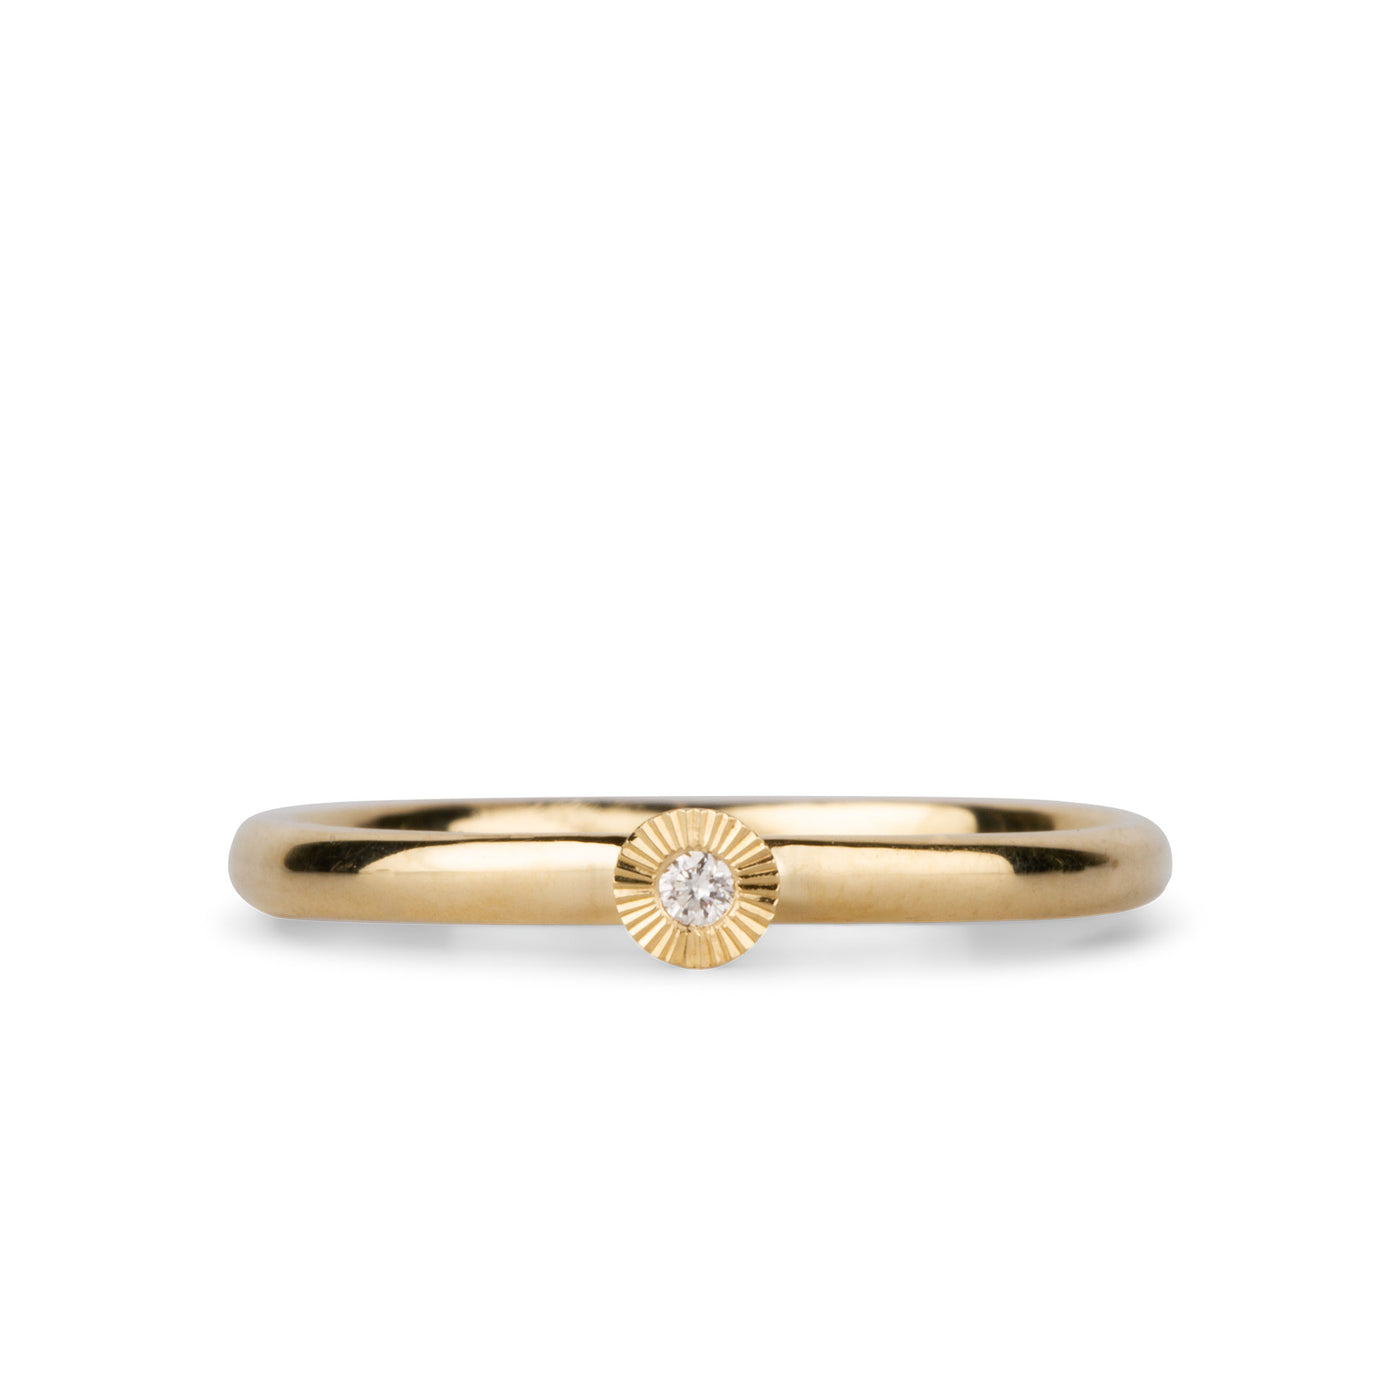 14k yellow gold small aurora stacking ring with a 1.5mm center diamond and engraved border